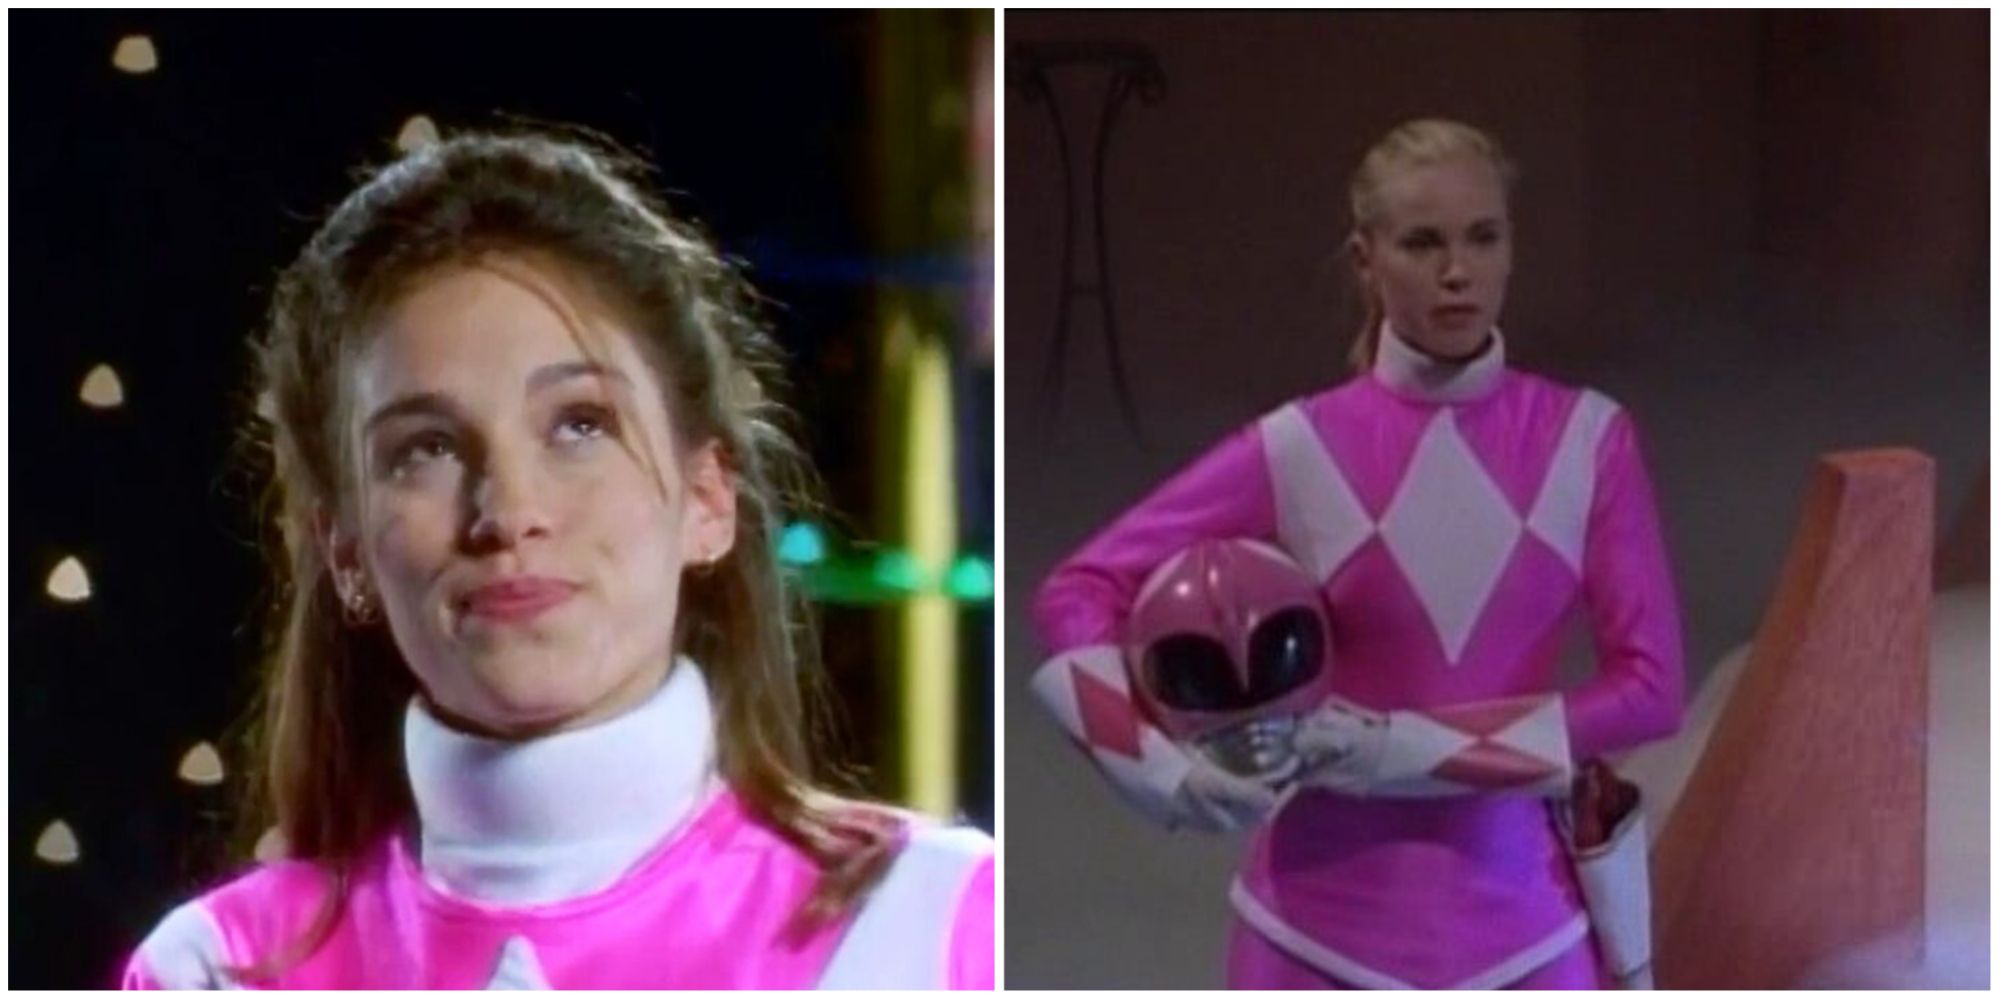 Kimberly Hart and Kat as the Pink Rangers